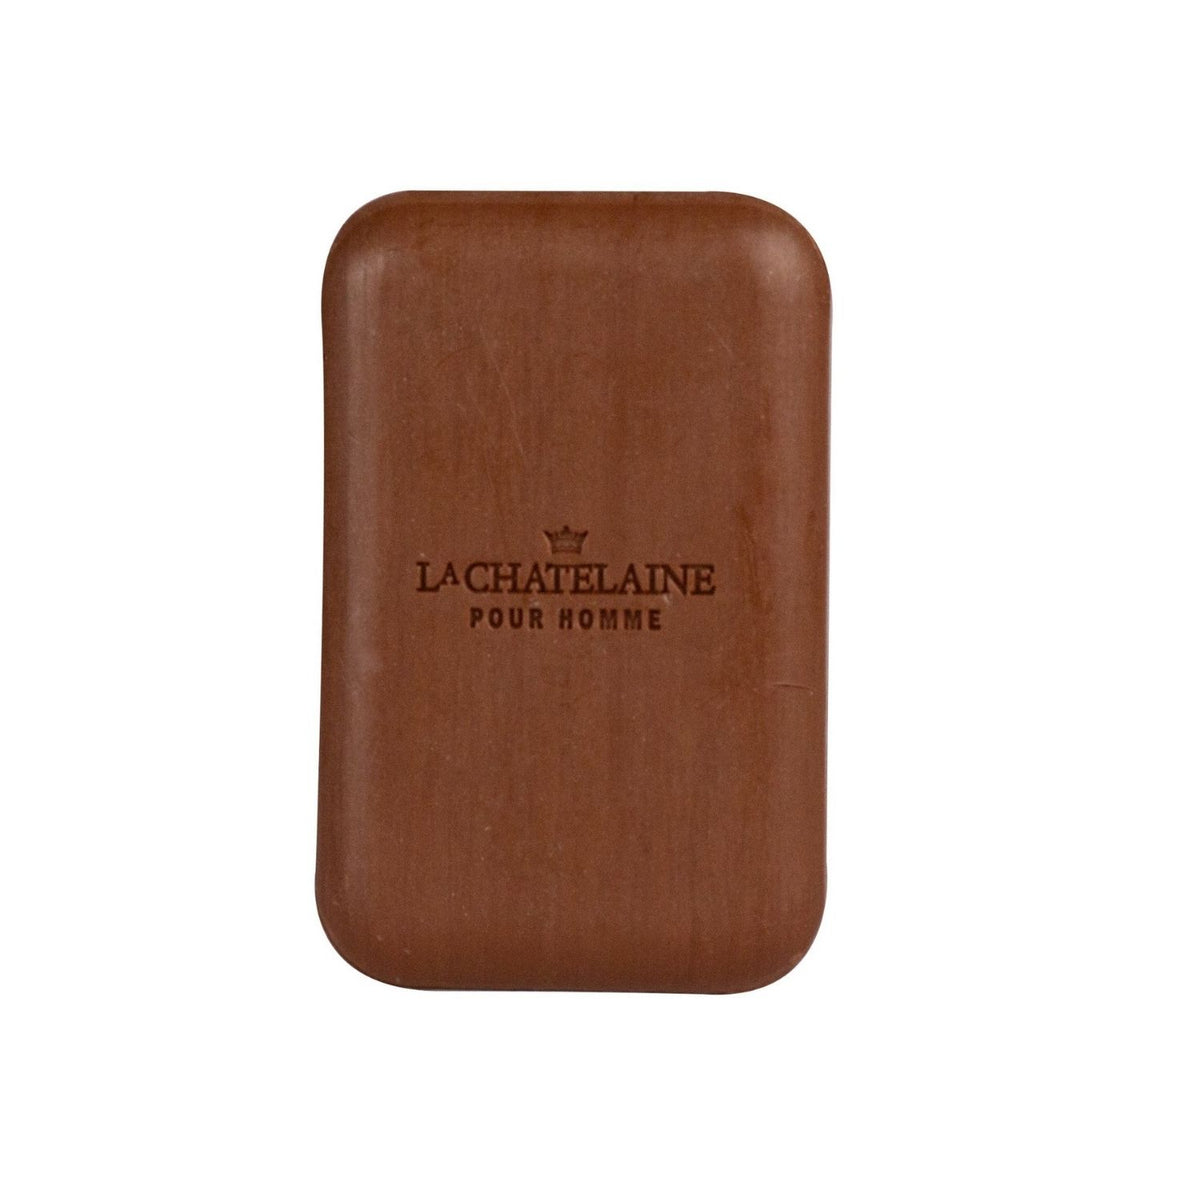 La Chatelaine Hand Wrapped Luxury Soap for Men